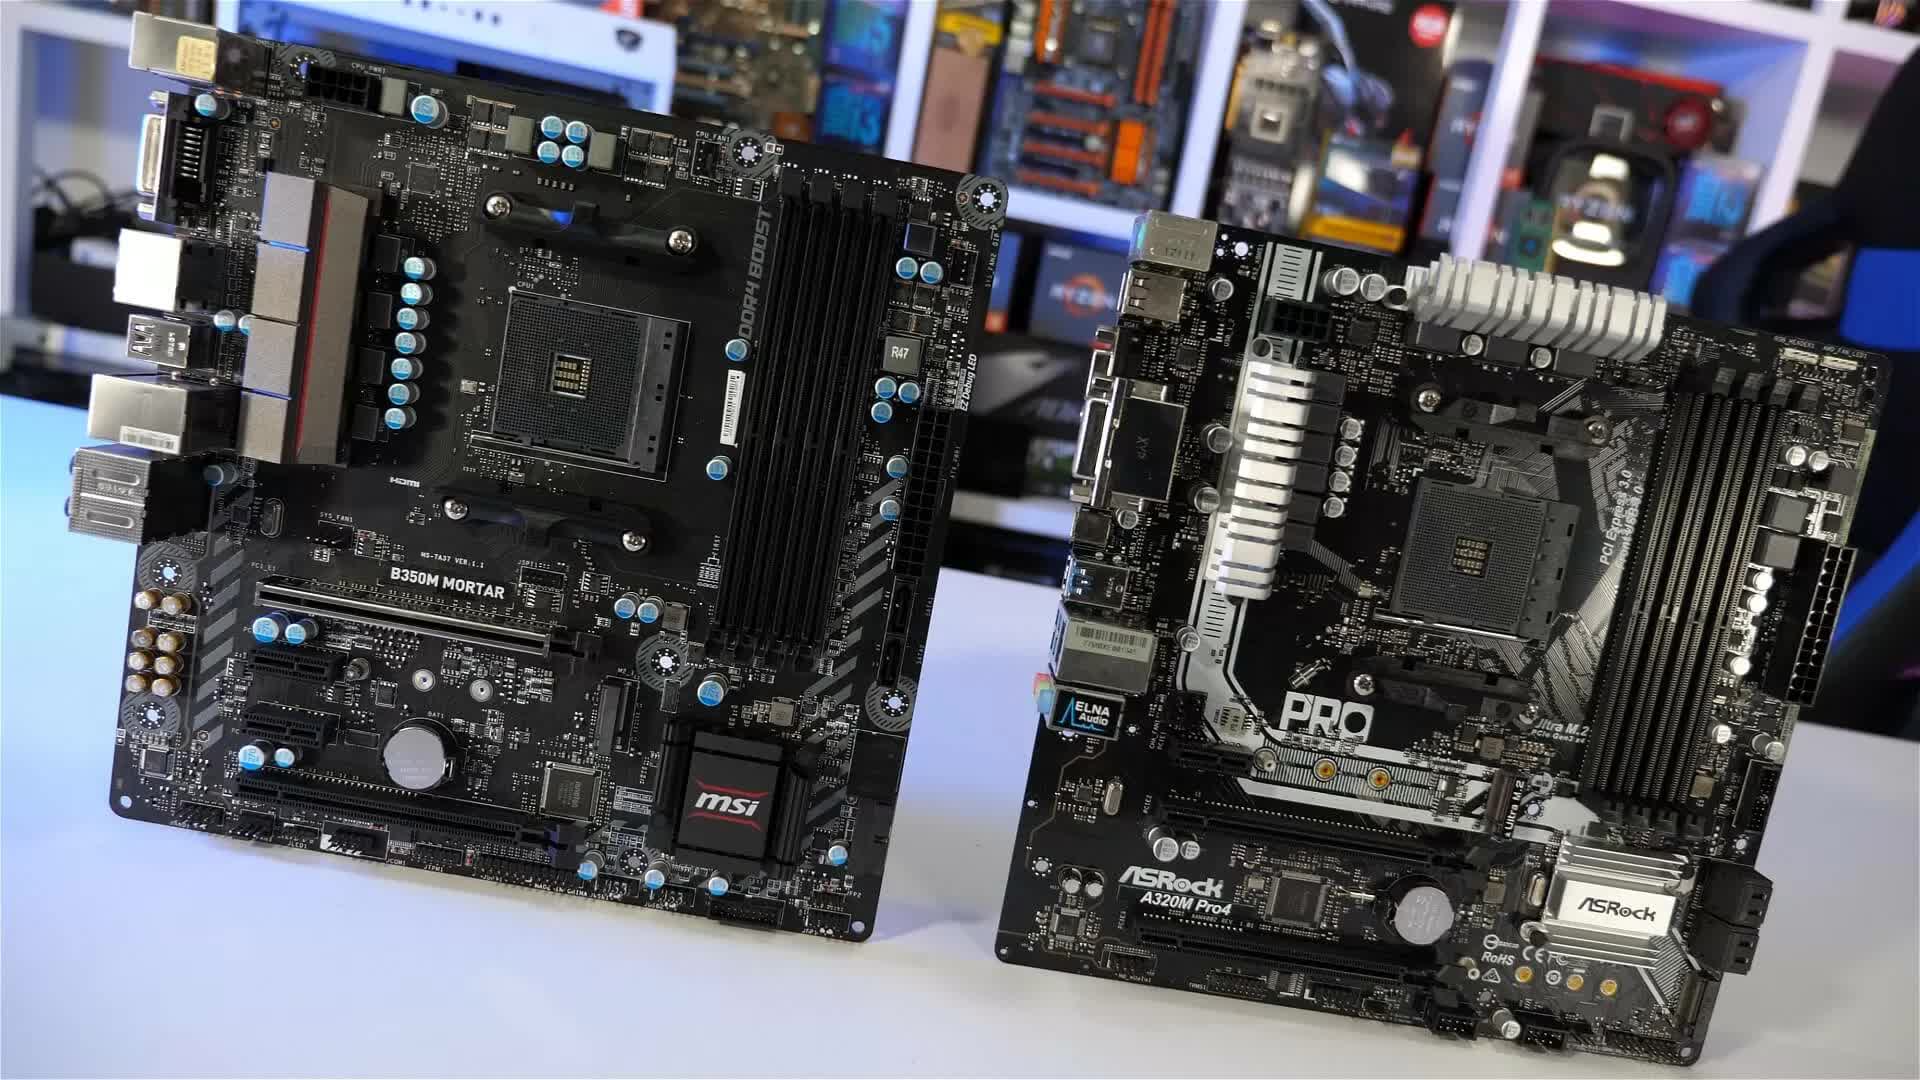 AMD says it's exploring adding Ryzen 5000 support on 300-series motherboards